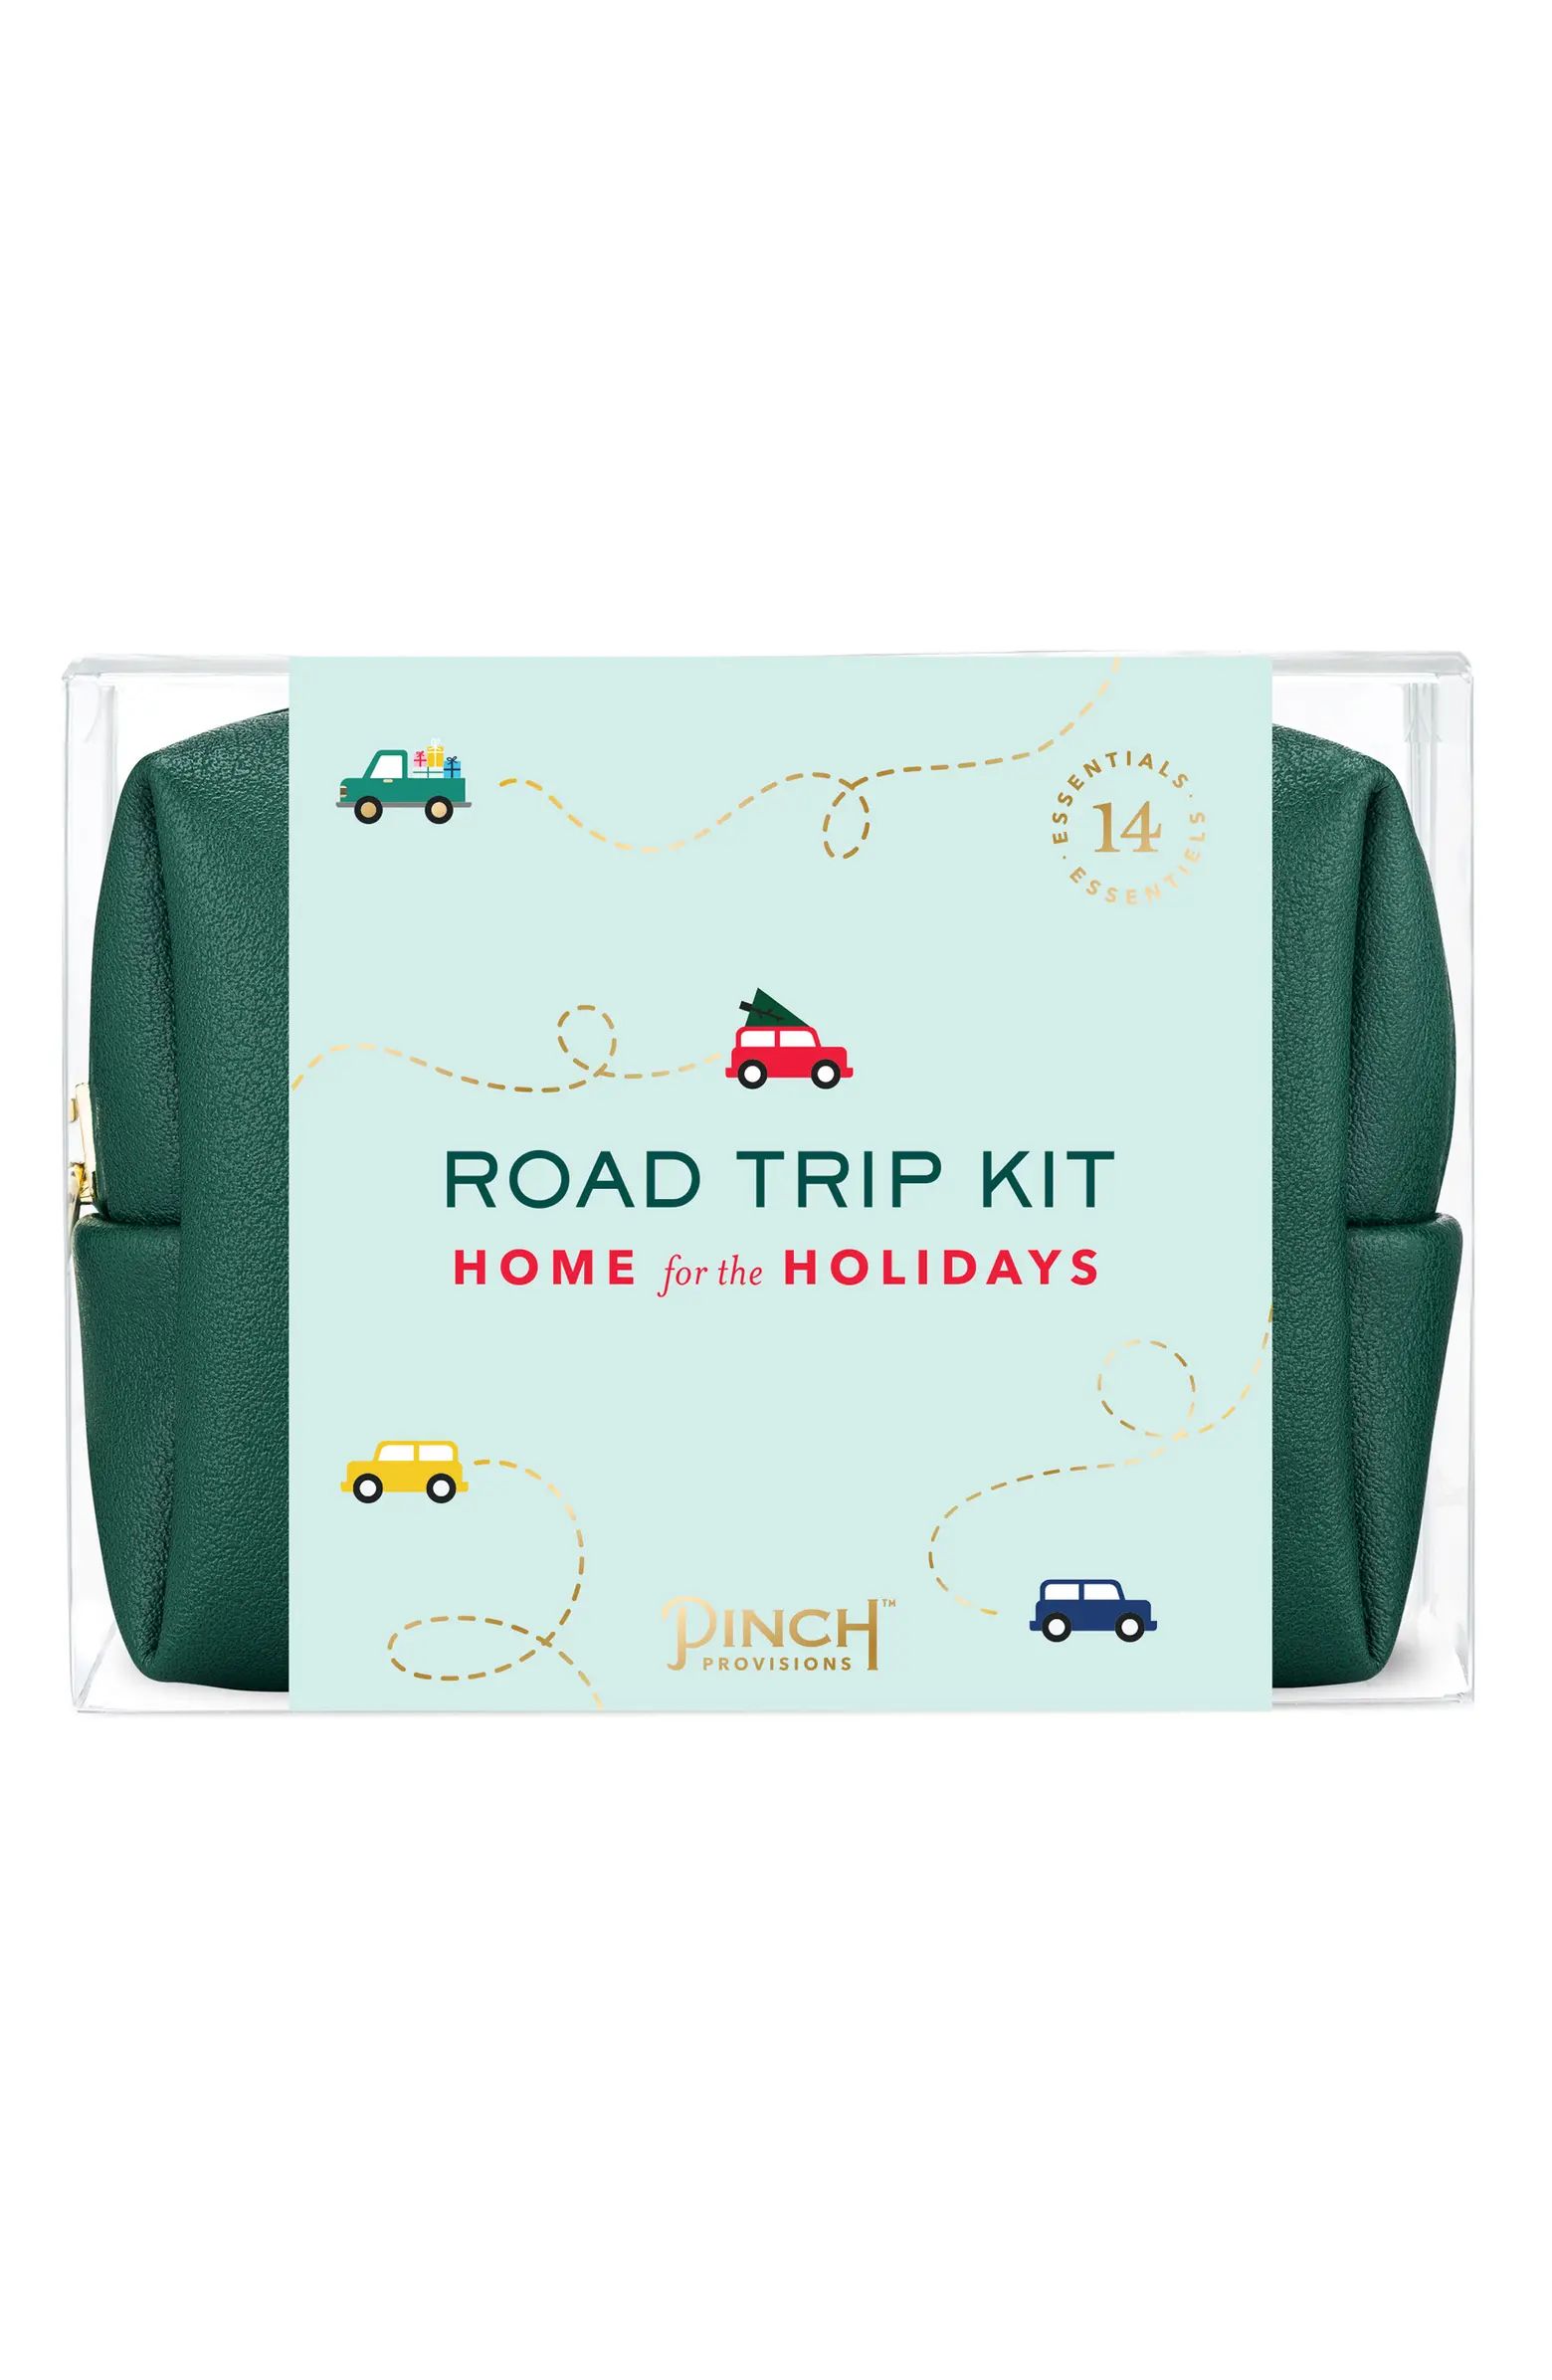 Pinch Provisions Home for the Holidays Road Trip Kit | Nordstrom | Nordstrom